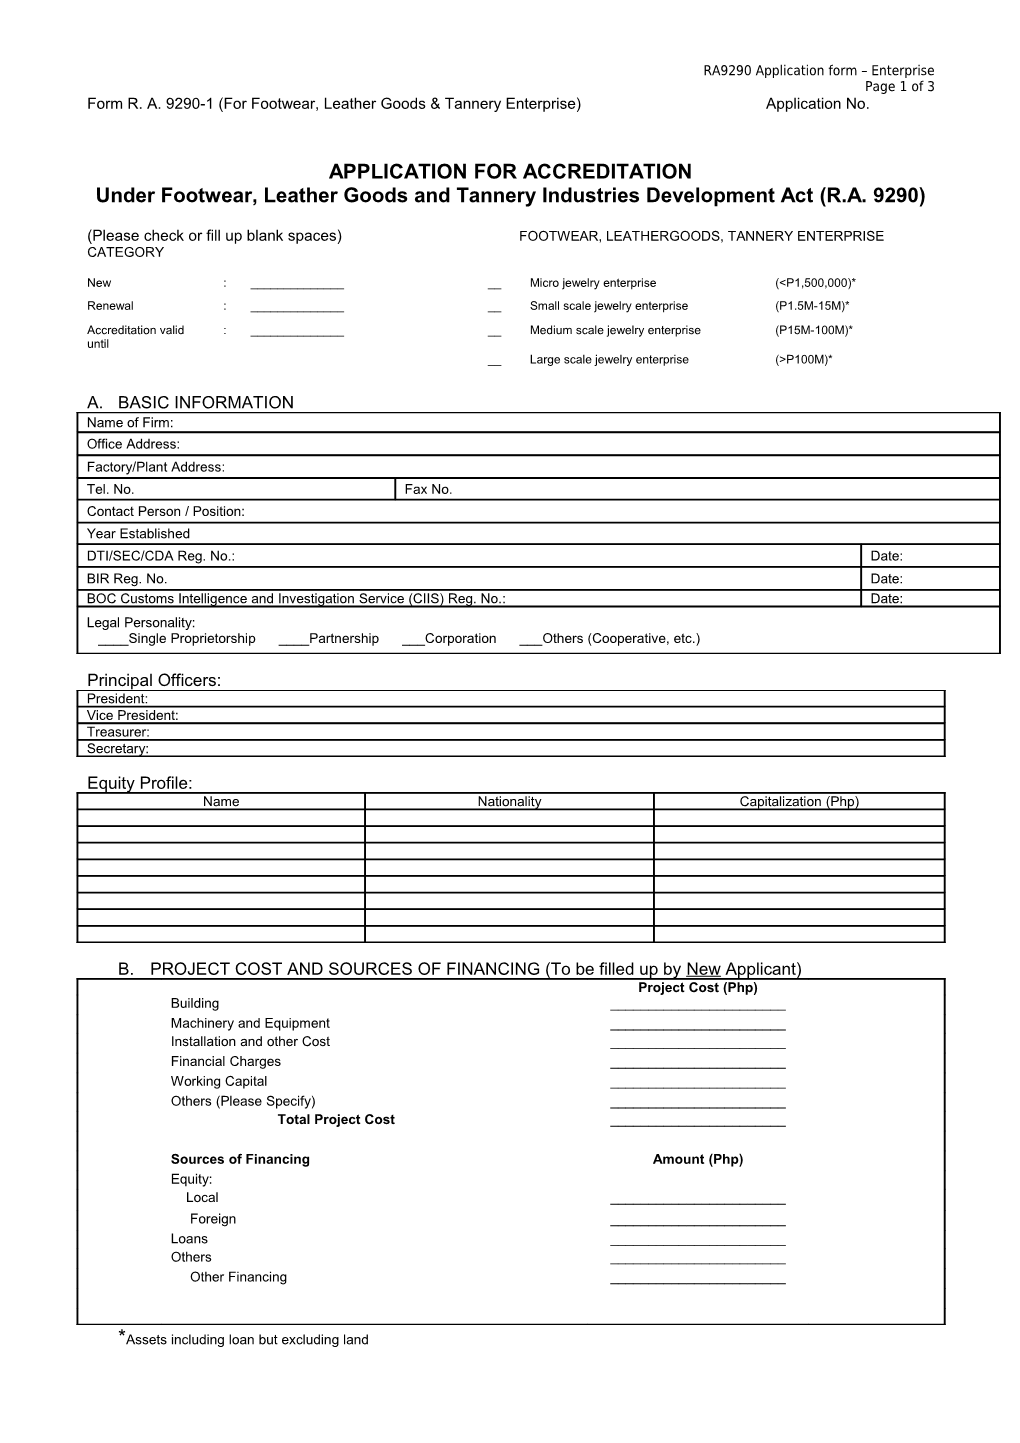 Form R. A. 9290-1 (For Footwear, Leather Goods & Tannery Enterprise)Application No